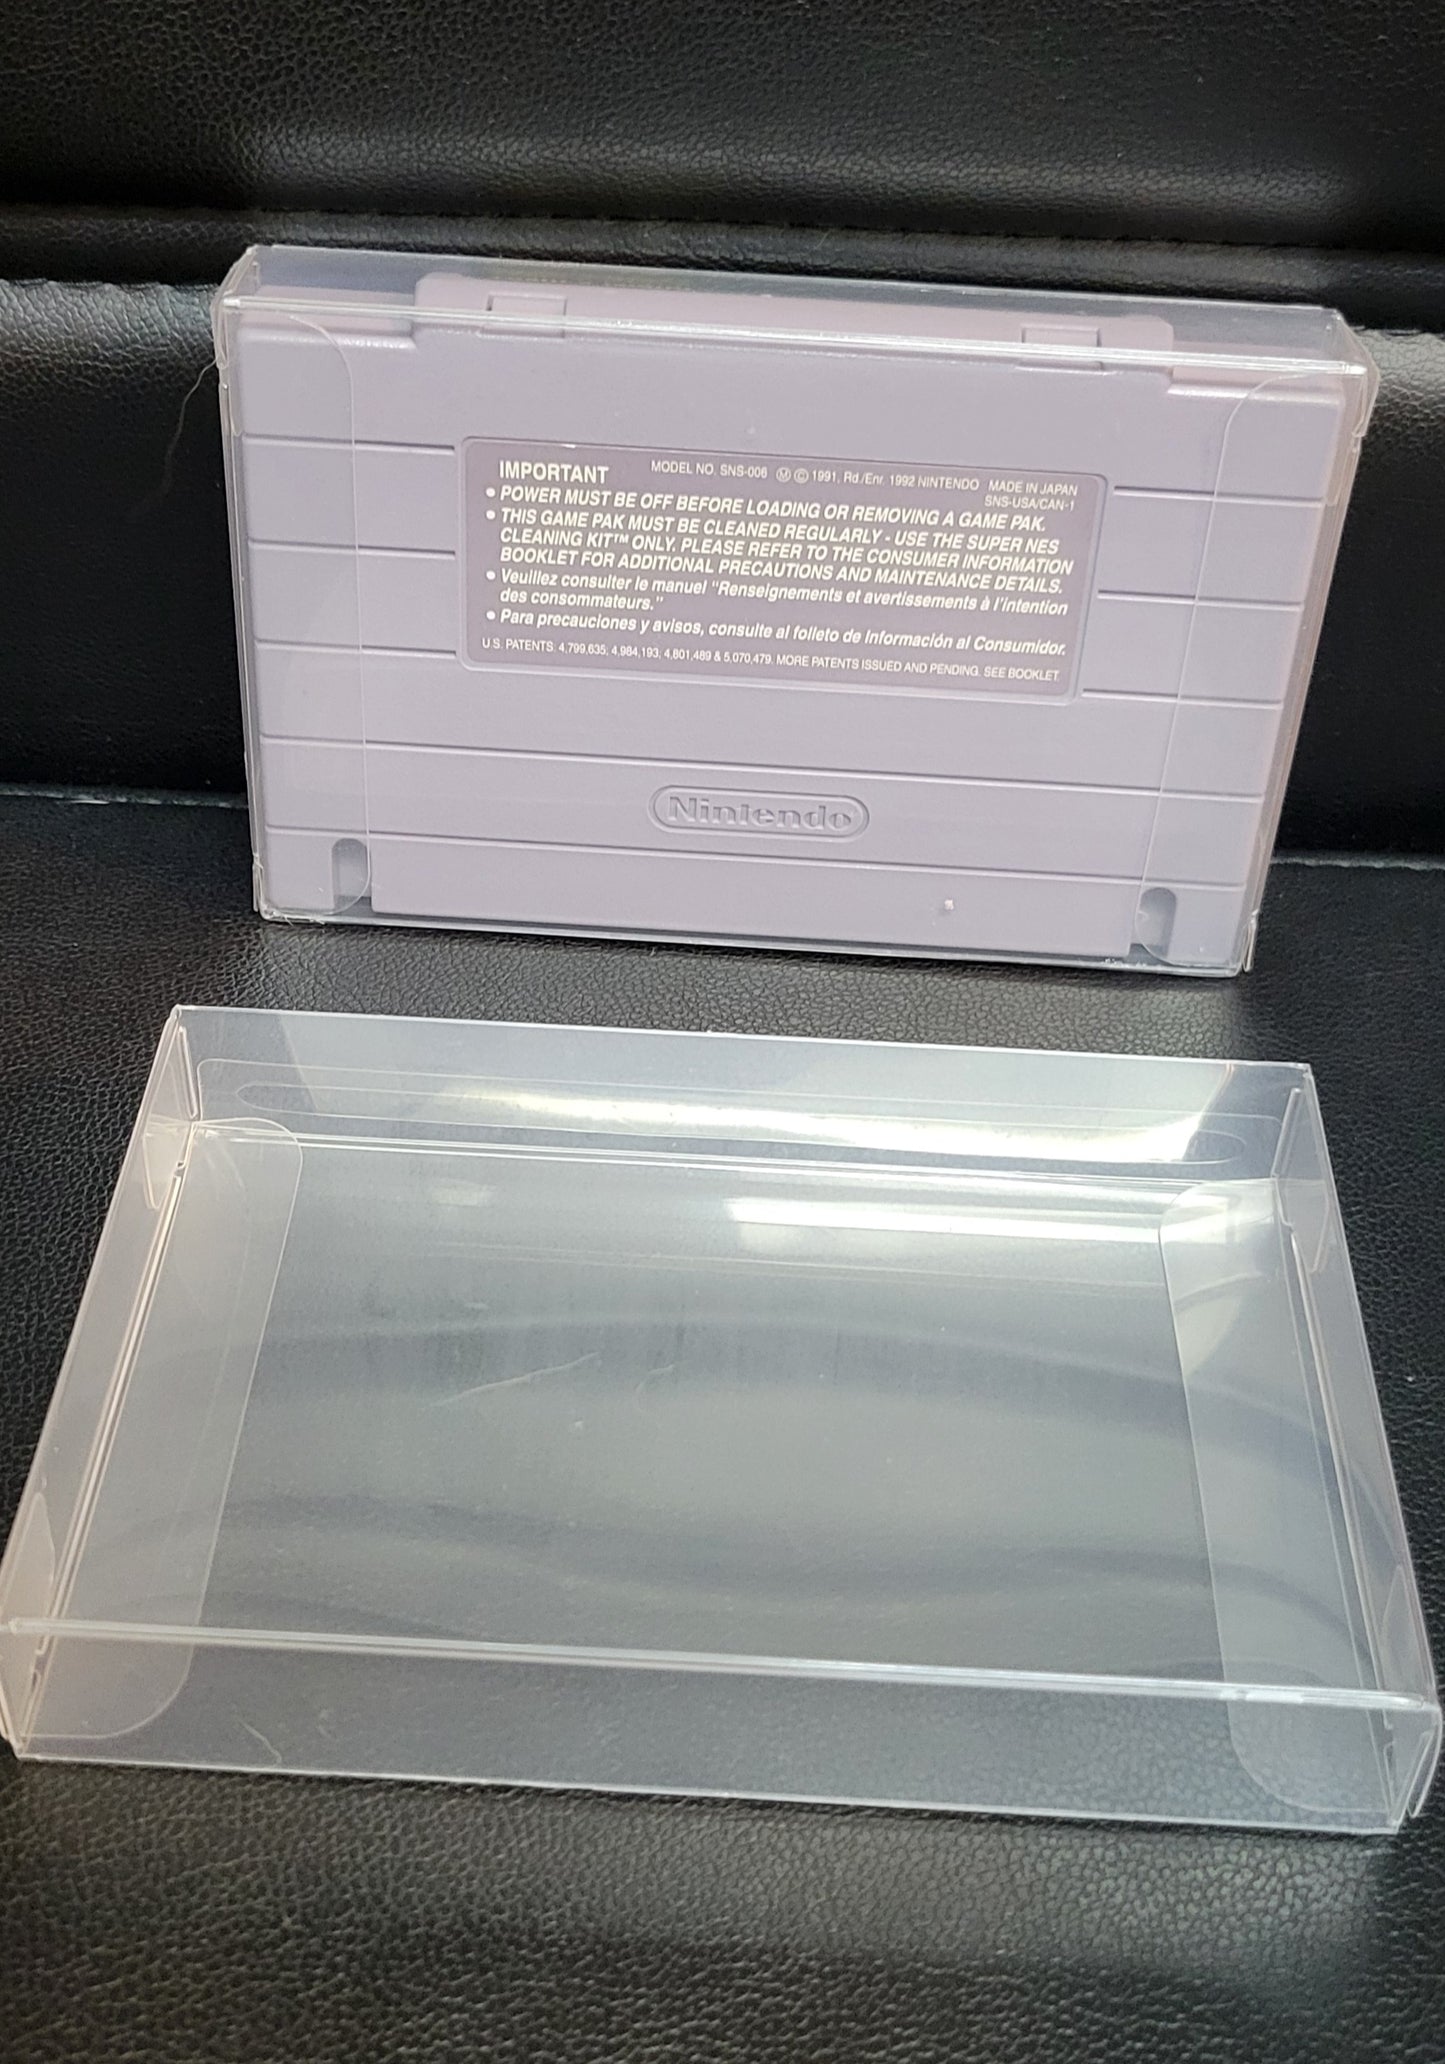 SMW 2: YOSHI'S ISLAND SNES Authentic Cartridge (Super Nintendo Entertainment System) Classic Arcade Game Great Original Condition Immaculate + Protector